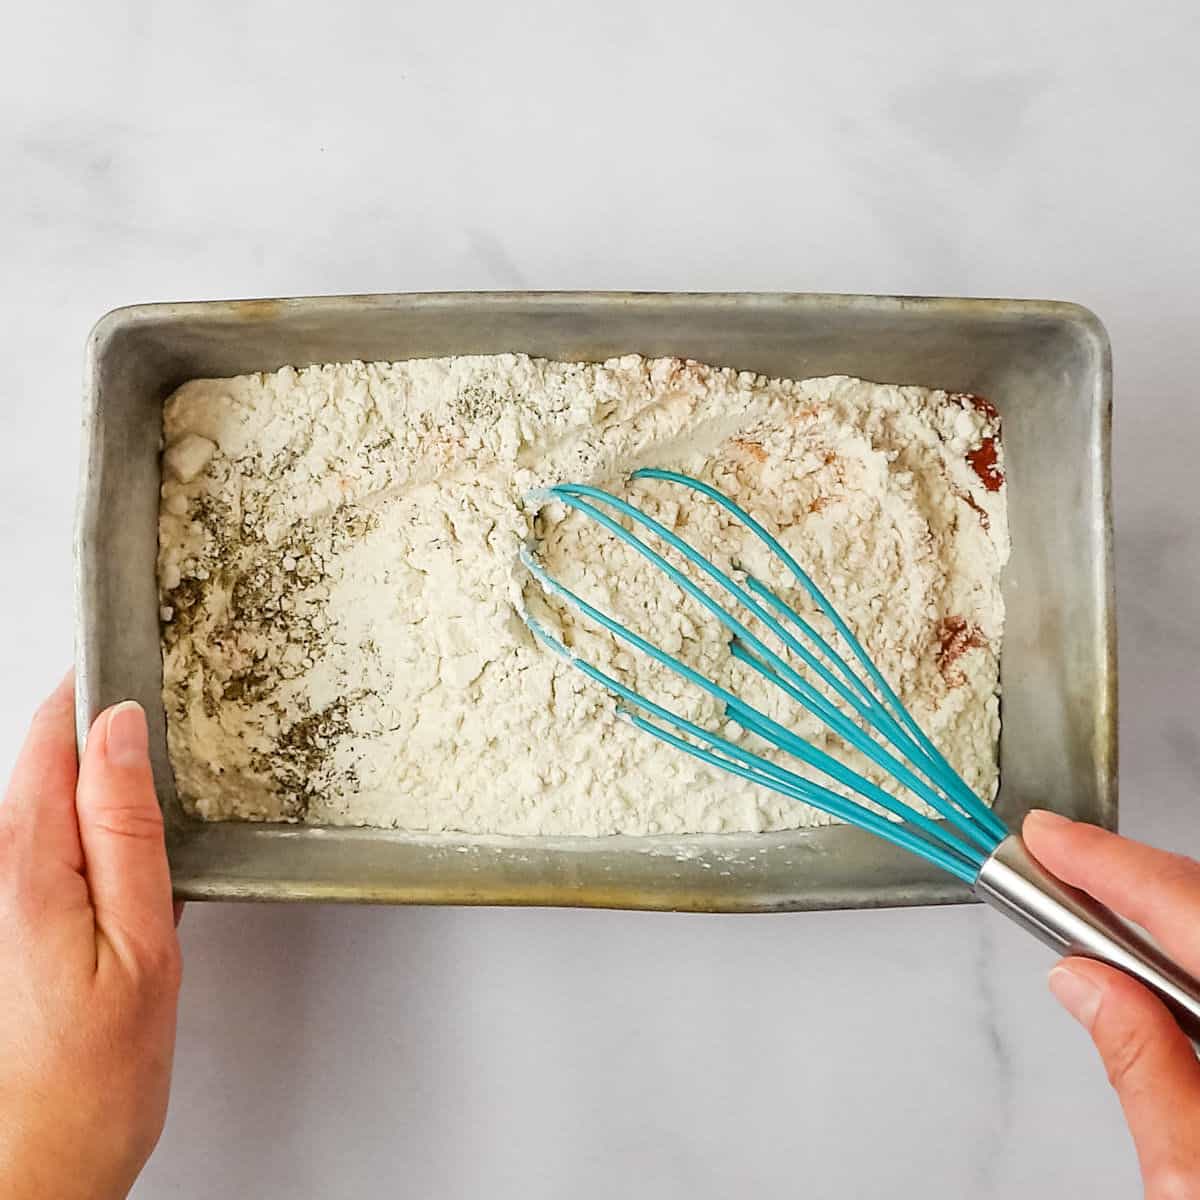 Mixing seasoned flour together in a baking pan.